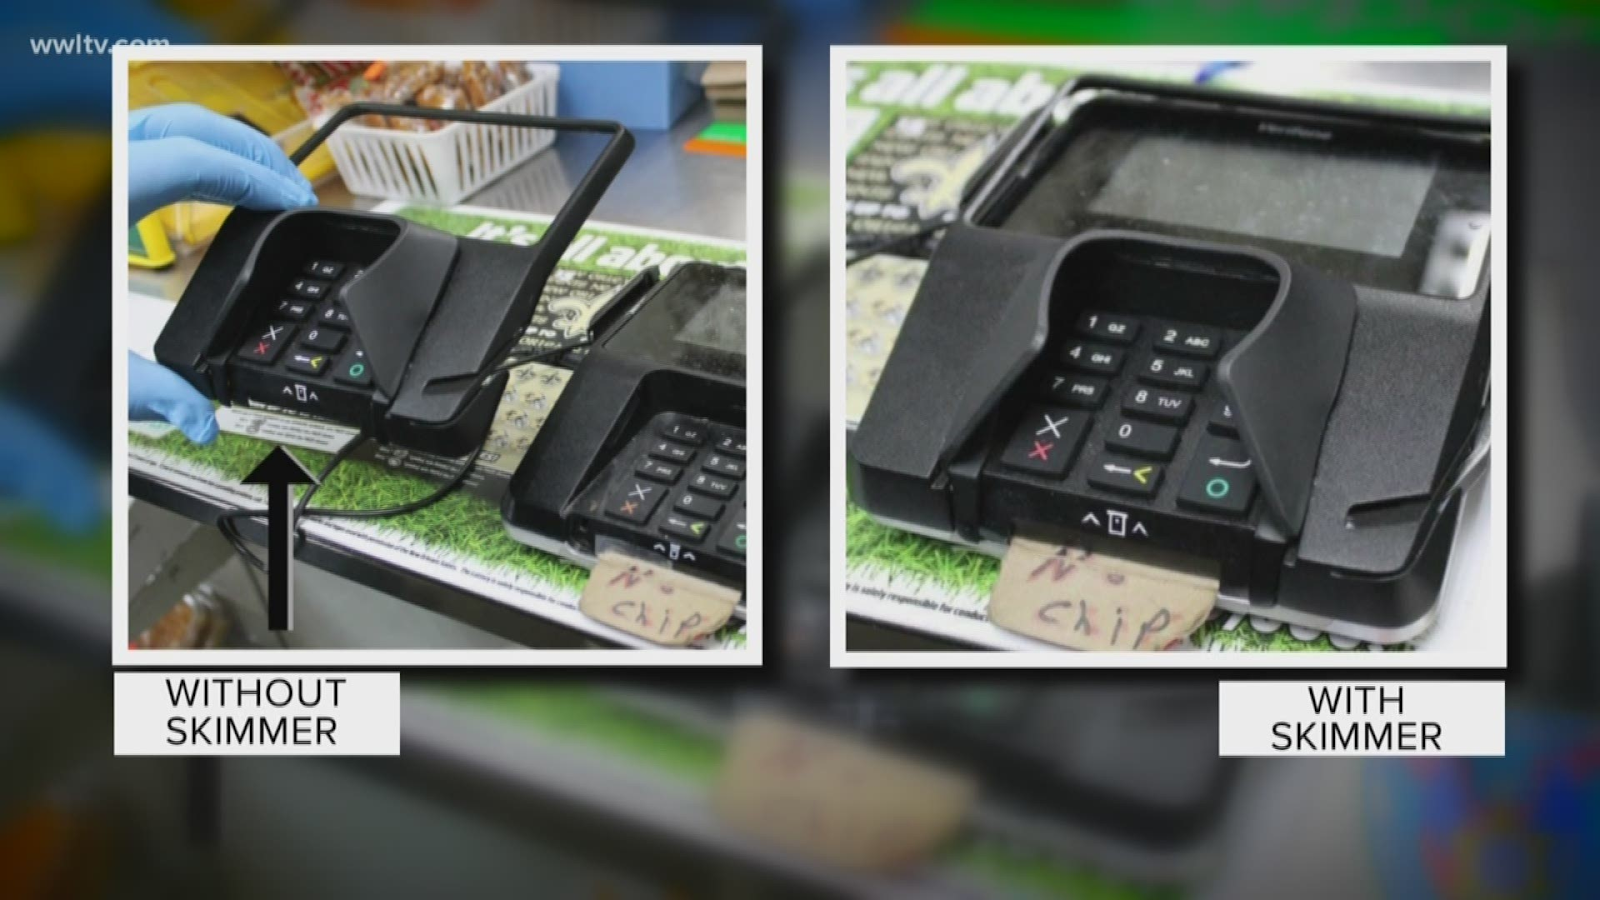 How to physically detect a credit card skimmer at a store